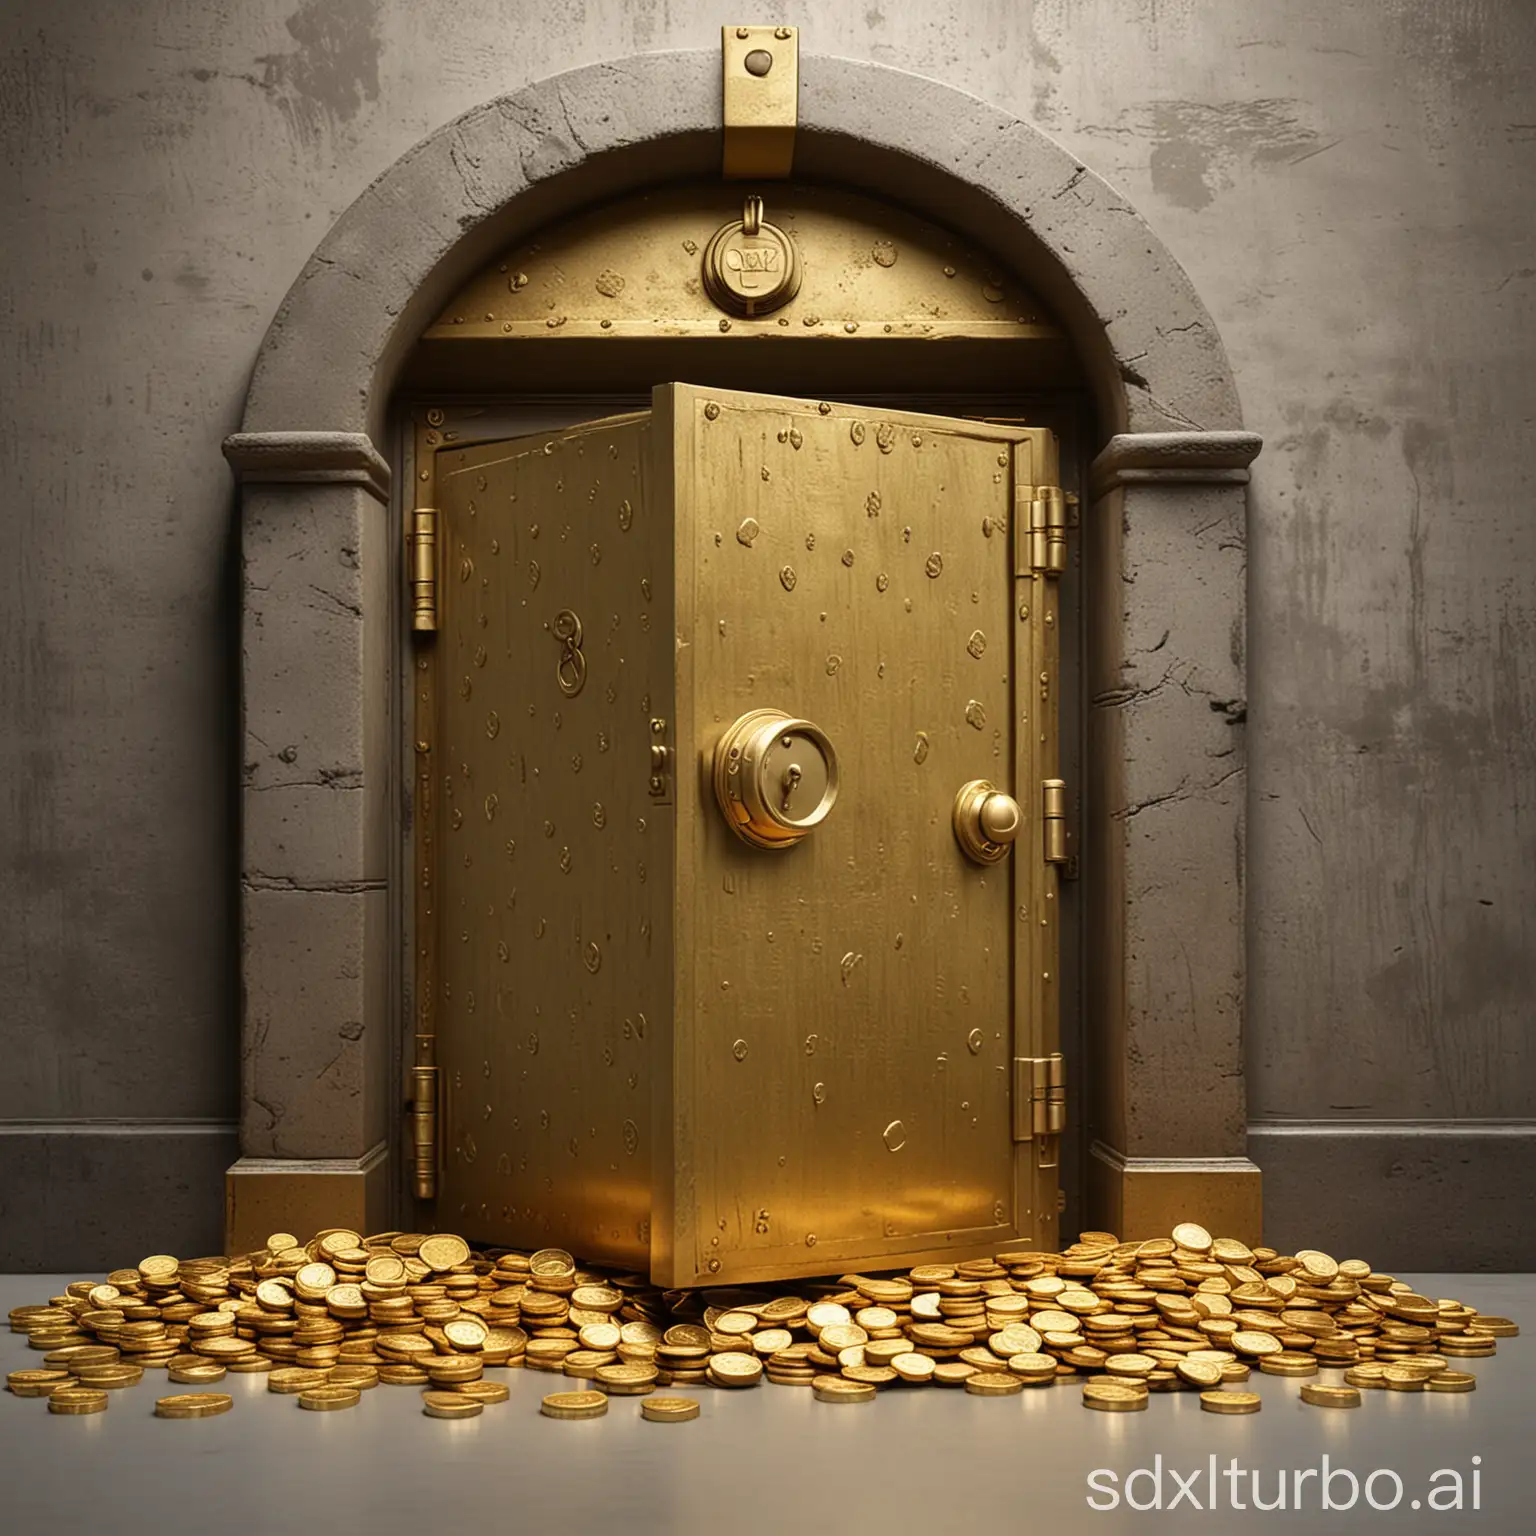 Mysterious-Vault-Door-with-Glittering-Gold-Coins-Awaiting-Discovery